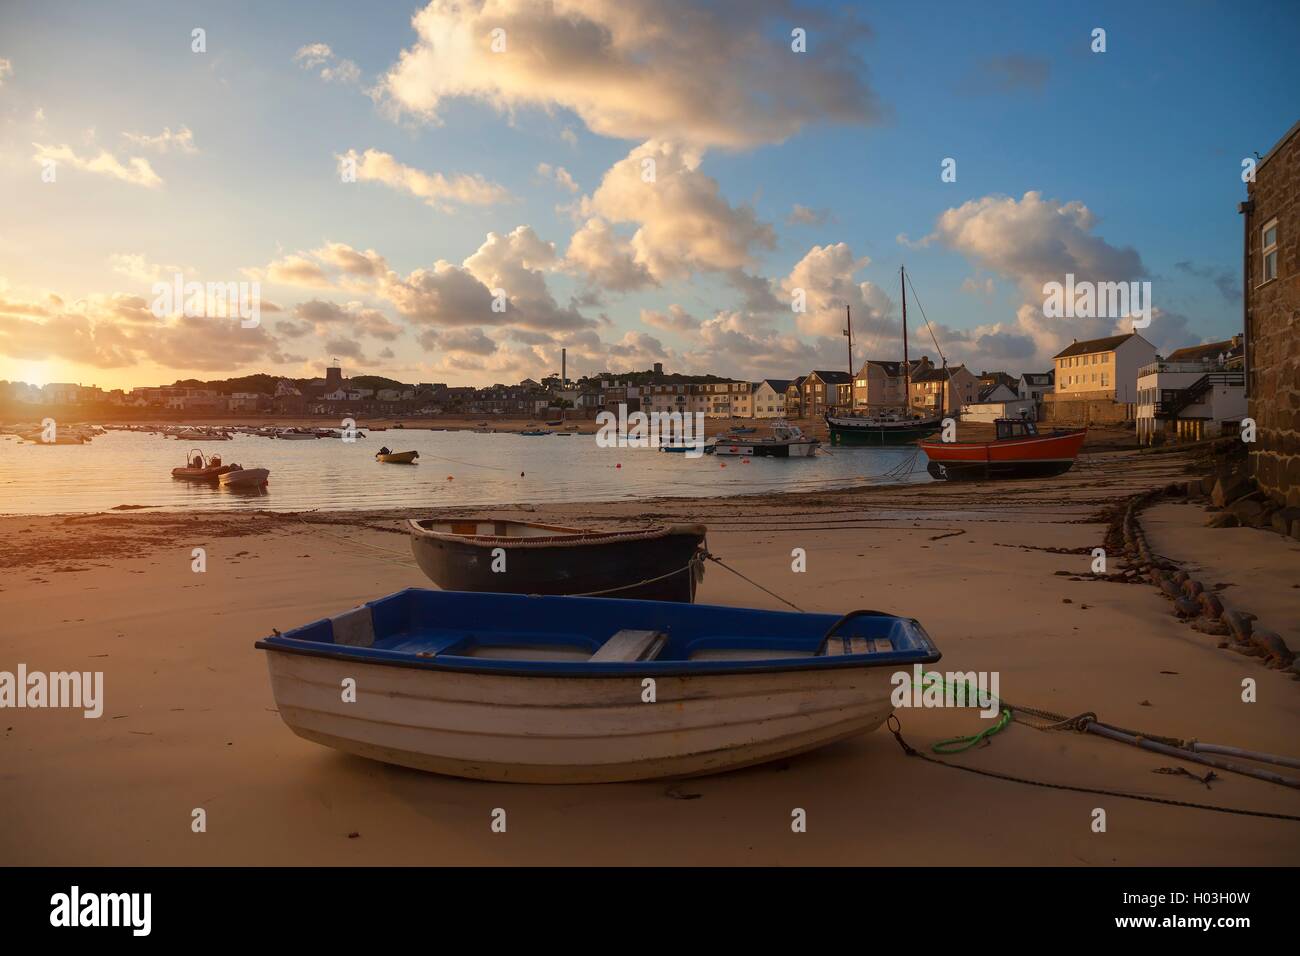 St Mary's Harbour at dawn, St Mary's, Isles of Scilly, England Stock Photo